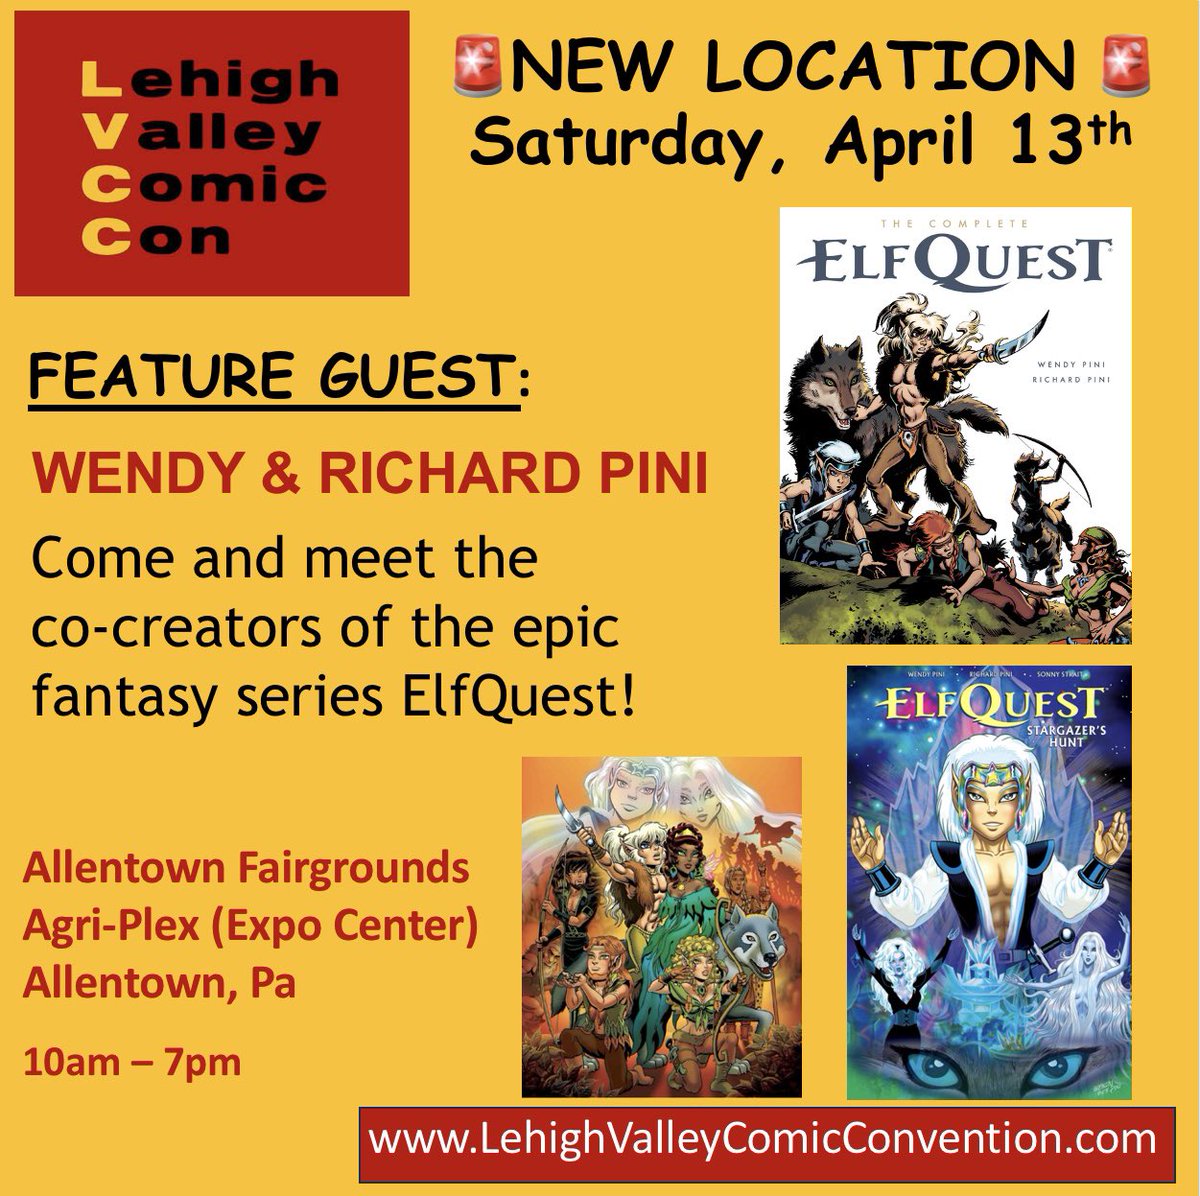 Meet the co-creators of ElfQuest in Allentown, PA!LehighValleyComicConvention.com @ElfQuestForever @ElfQuestNerd @littlesuntop @Elfquest340 @elfquest1232 @EQFanTrailer @elfquest4ever @Elfquestfan @CBNostalgia @CoolComicArt @ComicBookNOW @ircbpodcast @Comichistorians @ComicBook_Movie